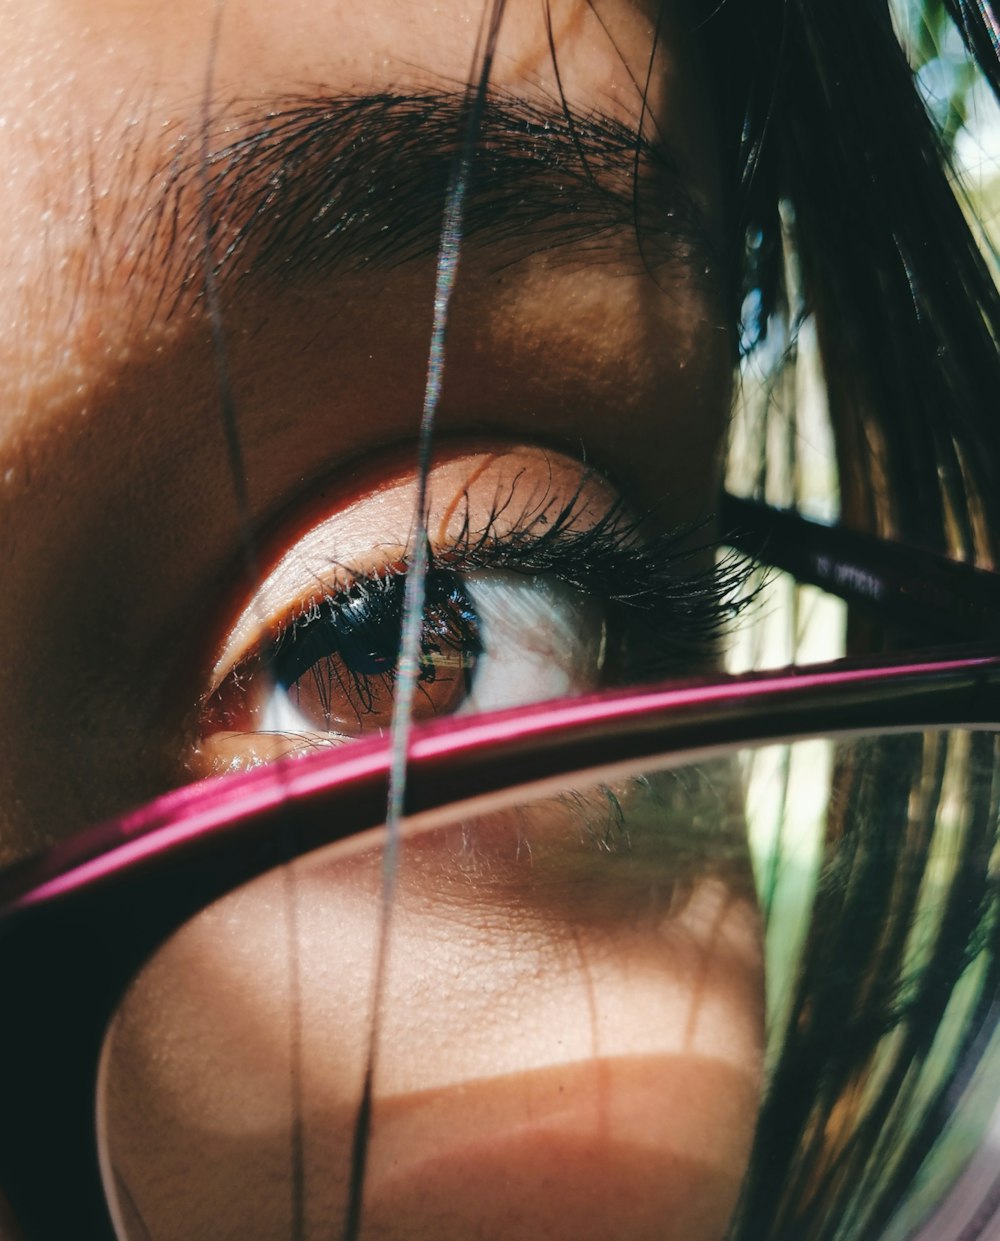 a close up of a person's eye with long eyelashes